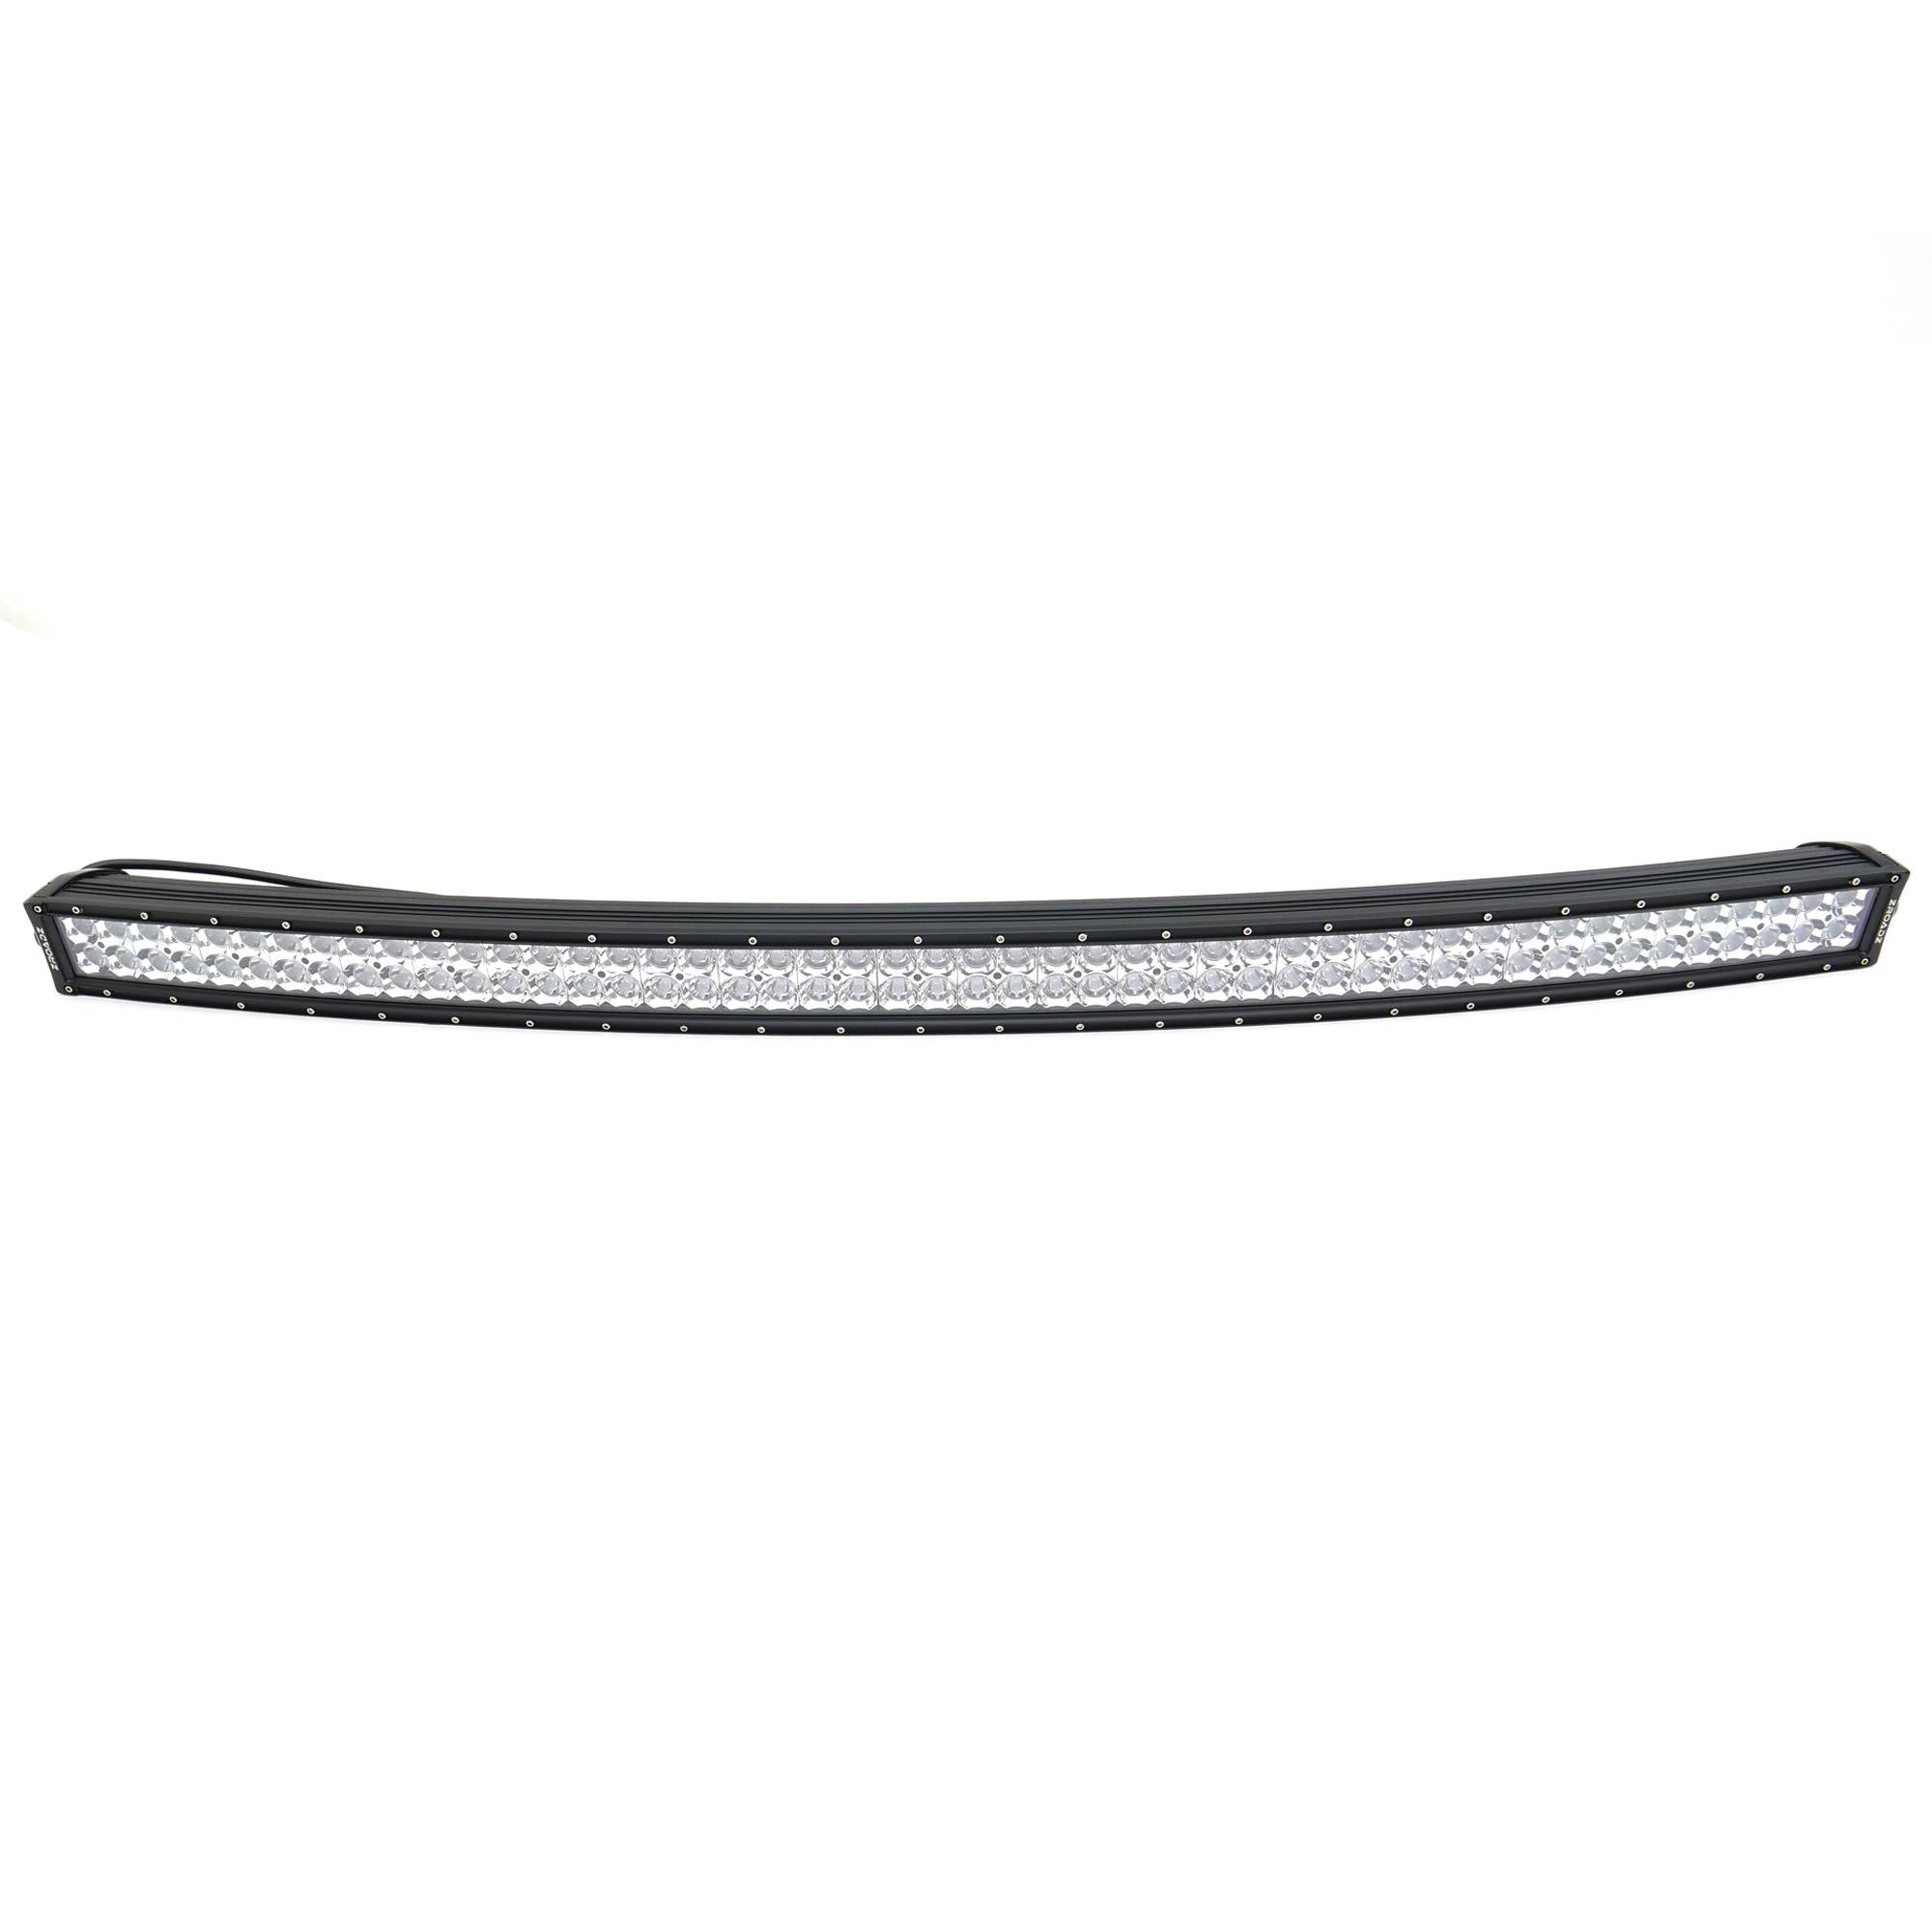 ZROADZ LED Curved 50 Inch Universal Bolt On No Drilling Required Double Row Light Bar Z30CBC14W288